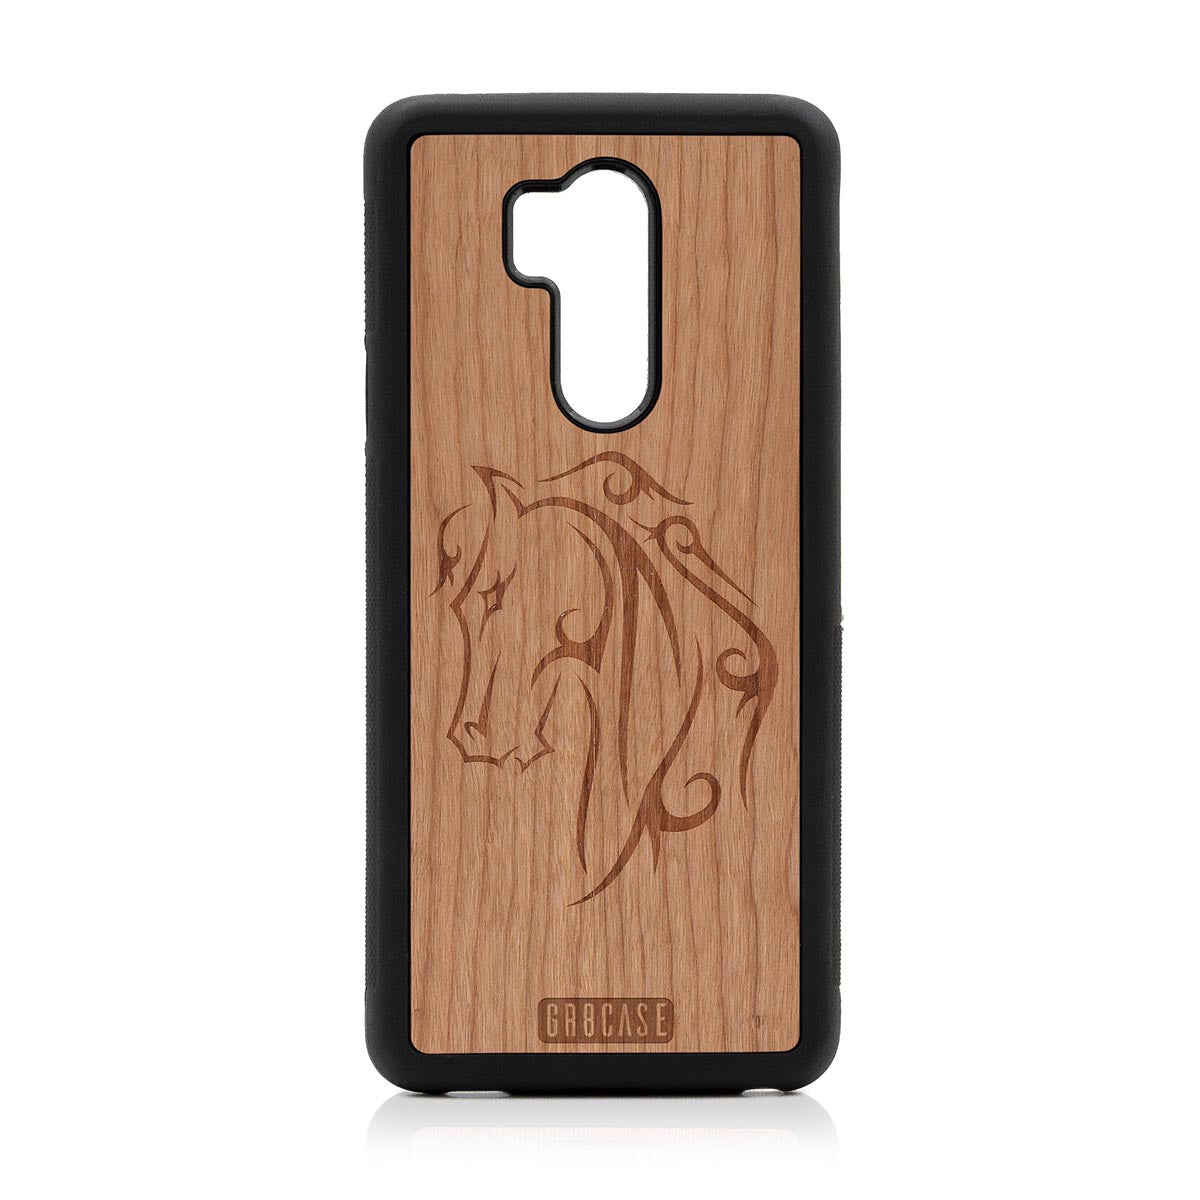 Horse Tattoo Design Wood Case LG G7 ThinQ by GR8CASE